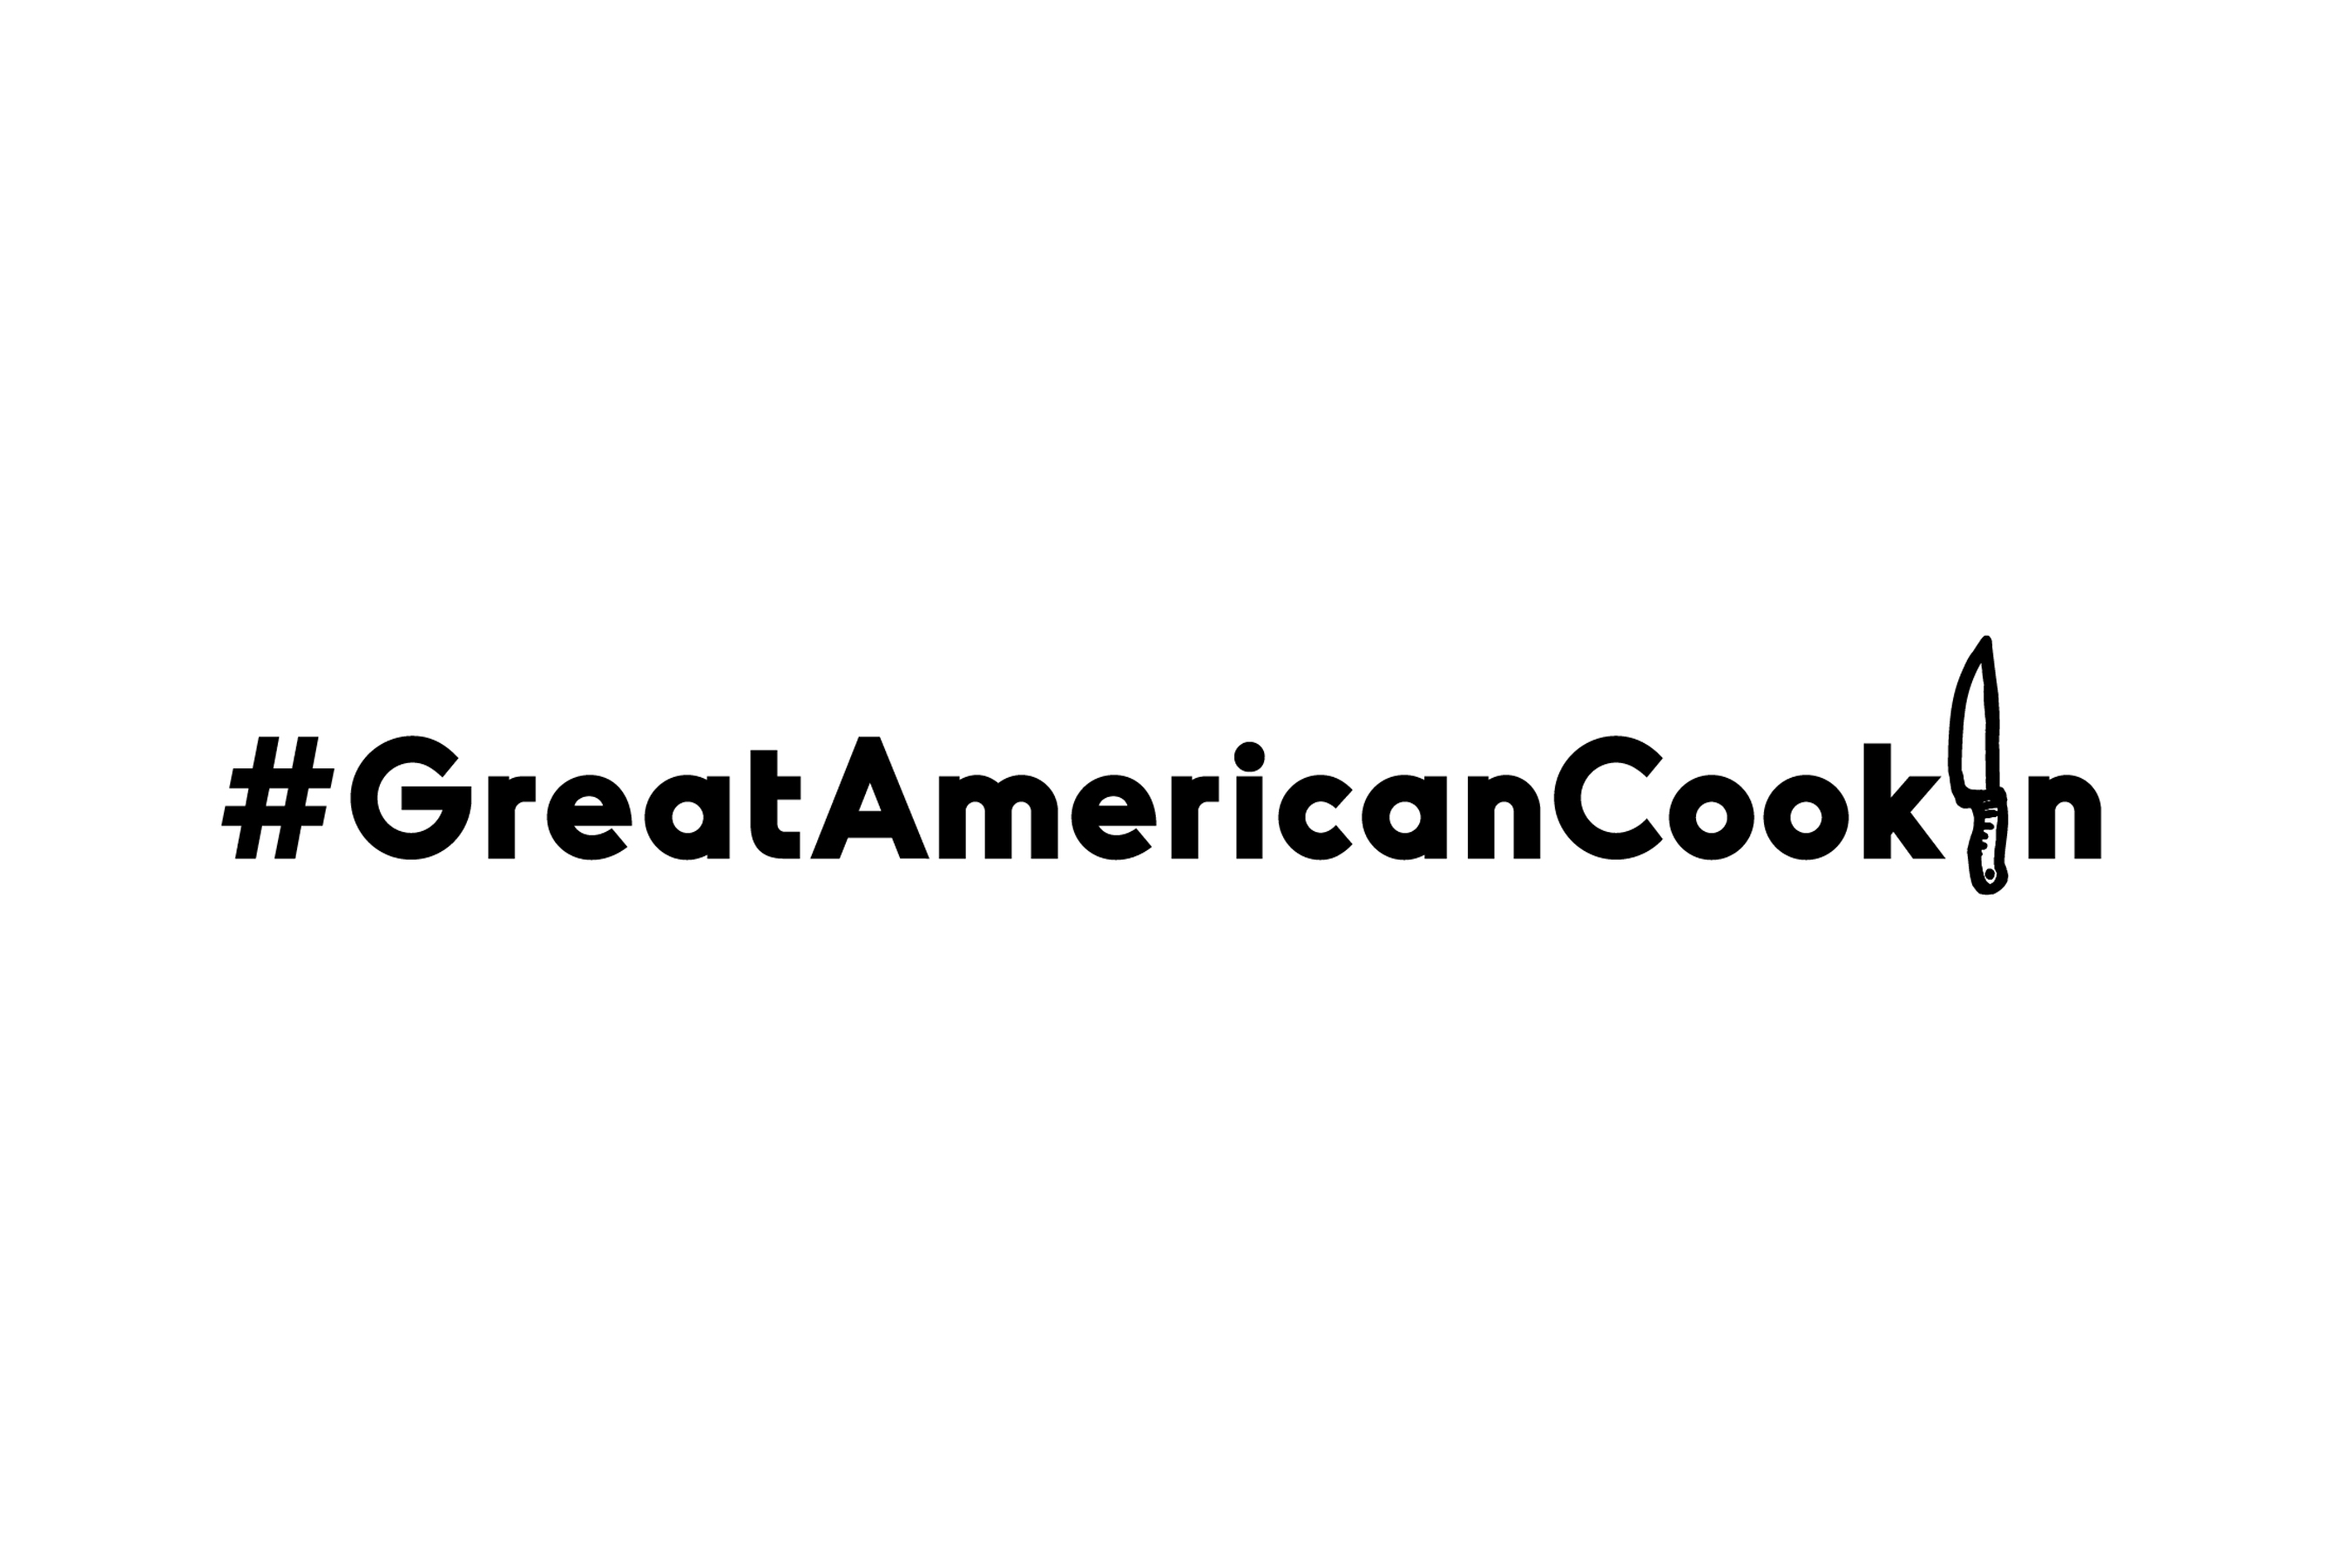 Pledge to participate by using the #GreatAmericanCookIn hashtag and share food photos on Twitter or Instagram from your own one-week challenge. Check out Chef Catherine’s How to Cook In for One Week for more tips and tricks!